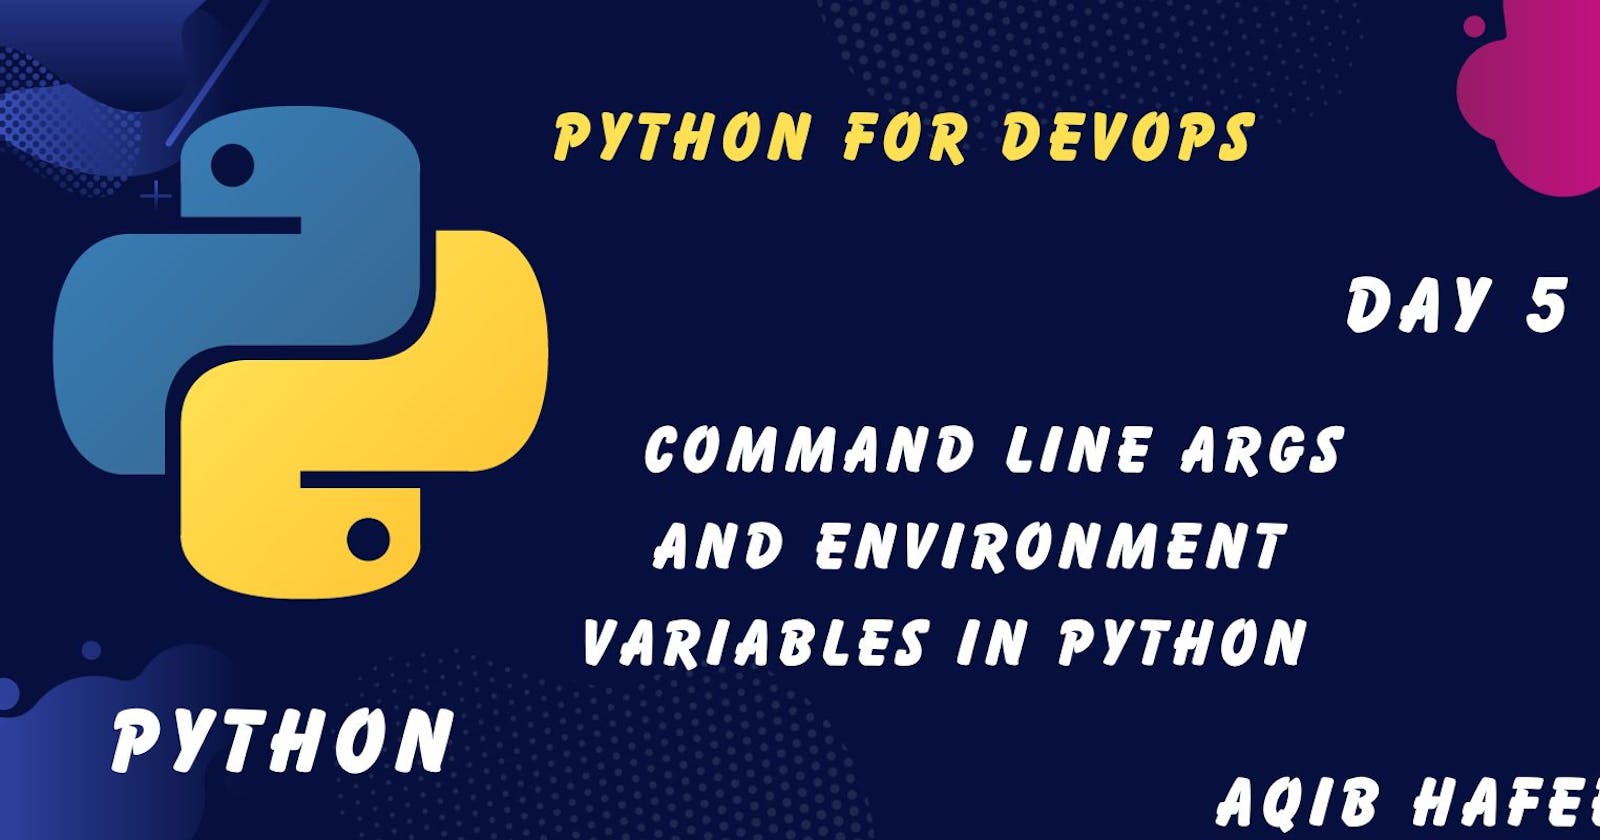 Day 5 - Command Line Args and Environment Variables in Python